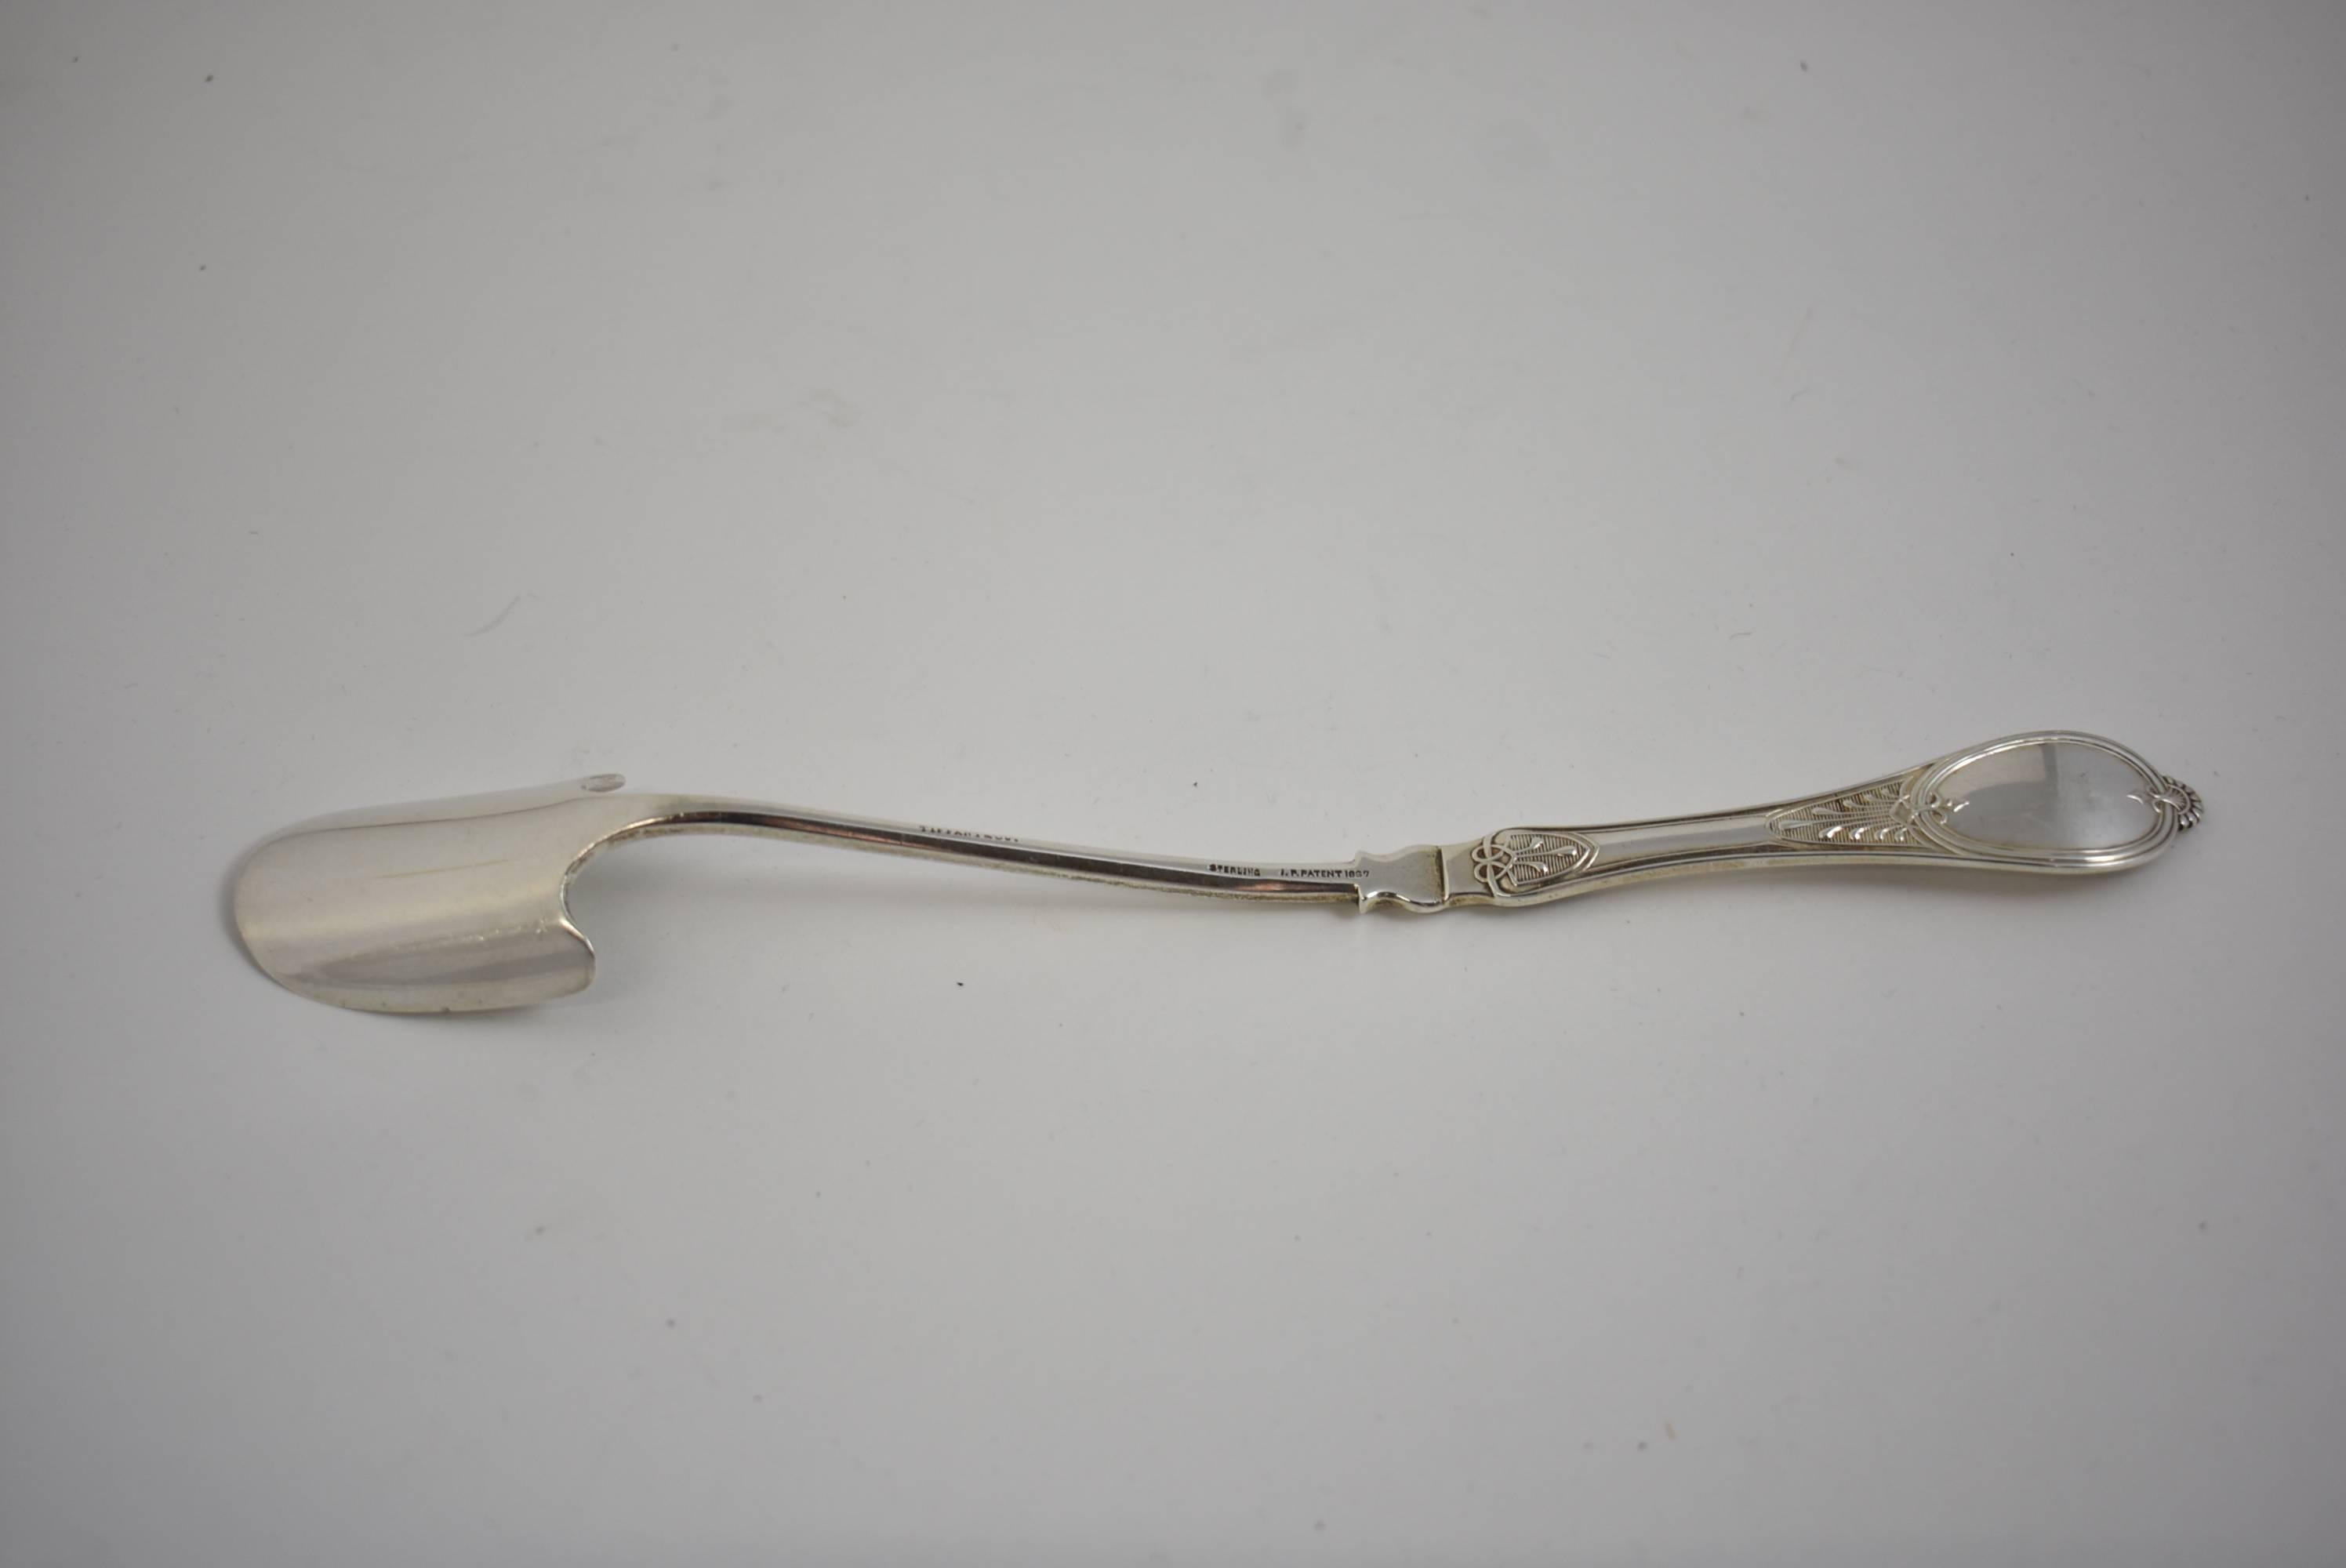 Antique Tiffany & Co. cheese scoop with patent pattern, 1887. Scoop weighs 65.8 grams. There is a monogram"LWL". Small nick on side of bowl.